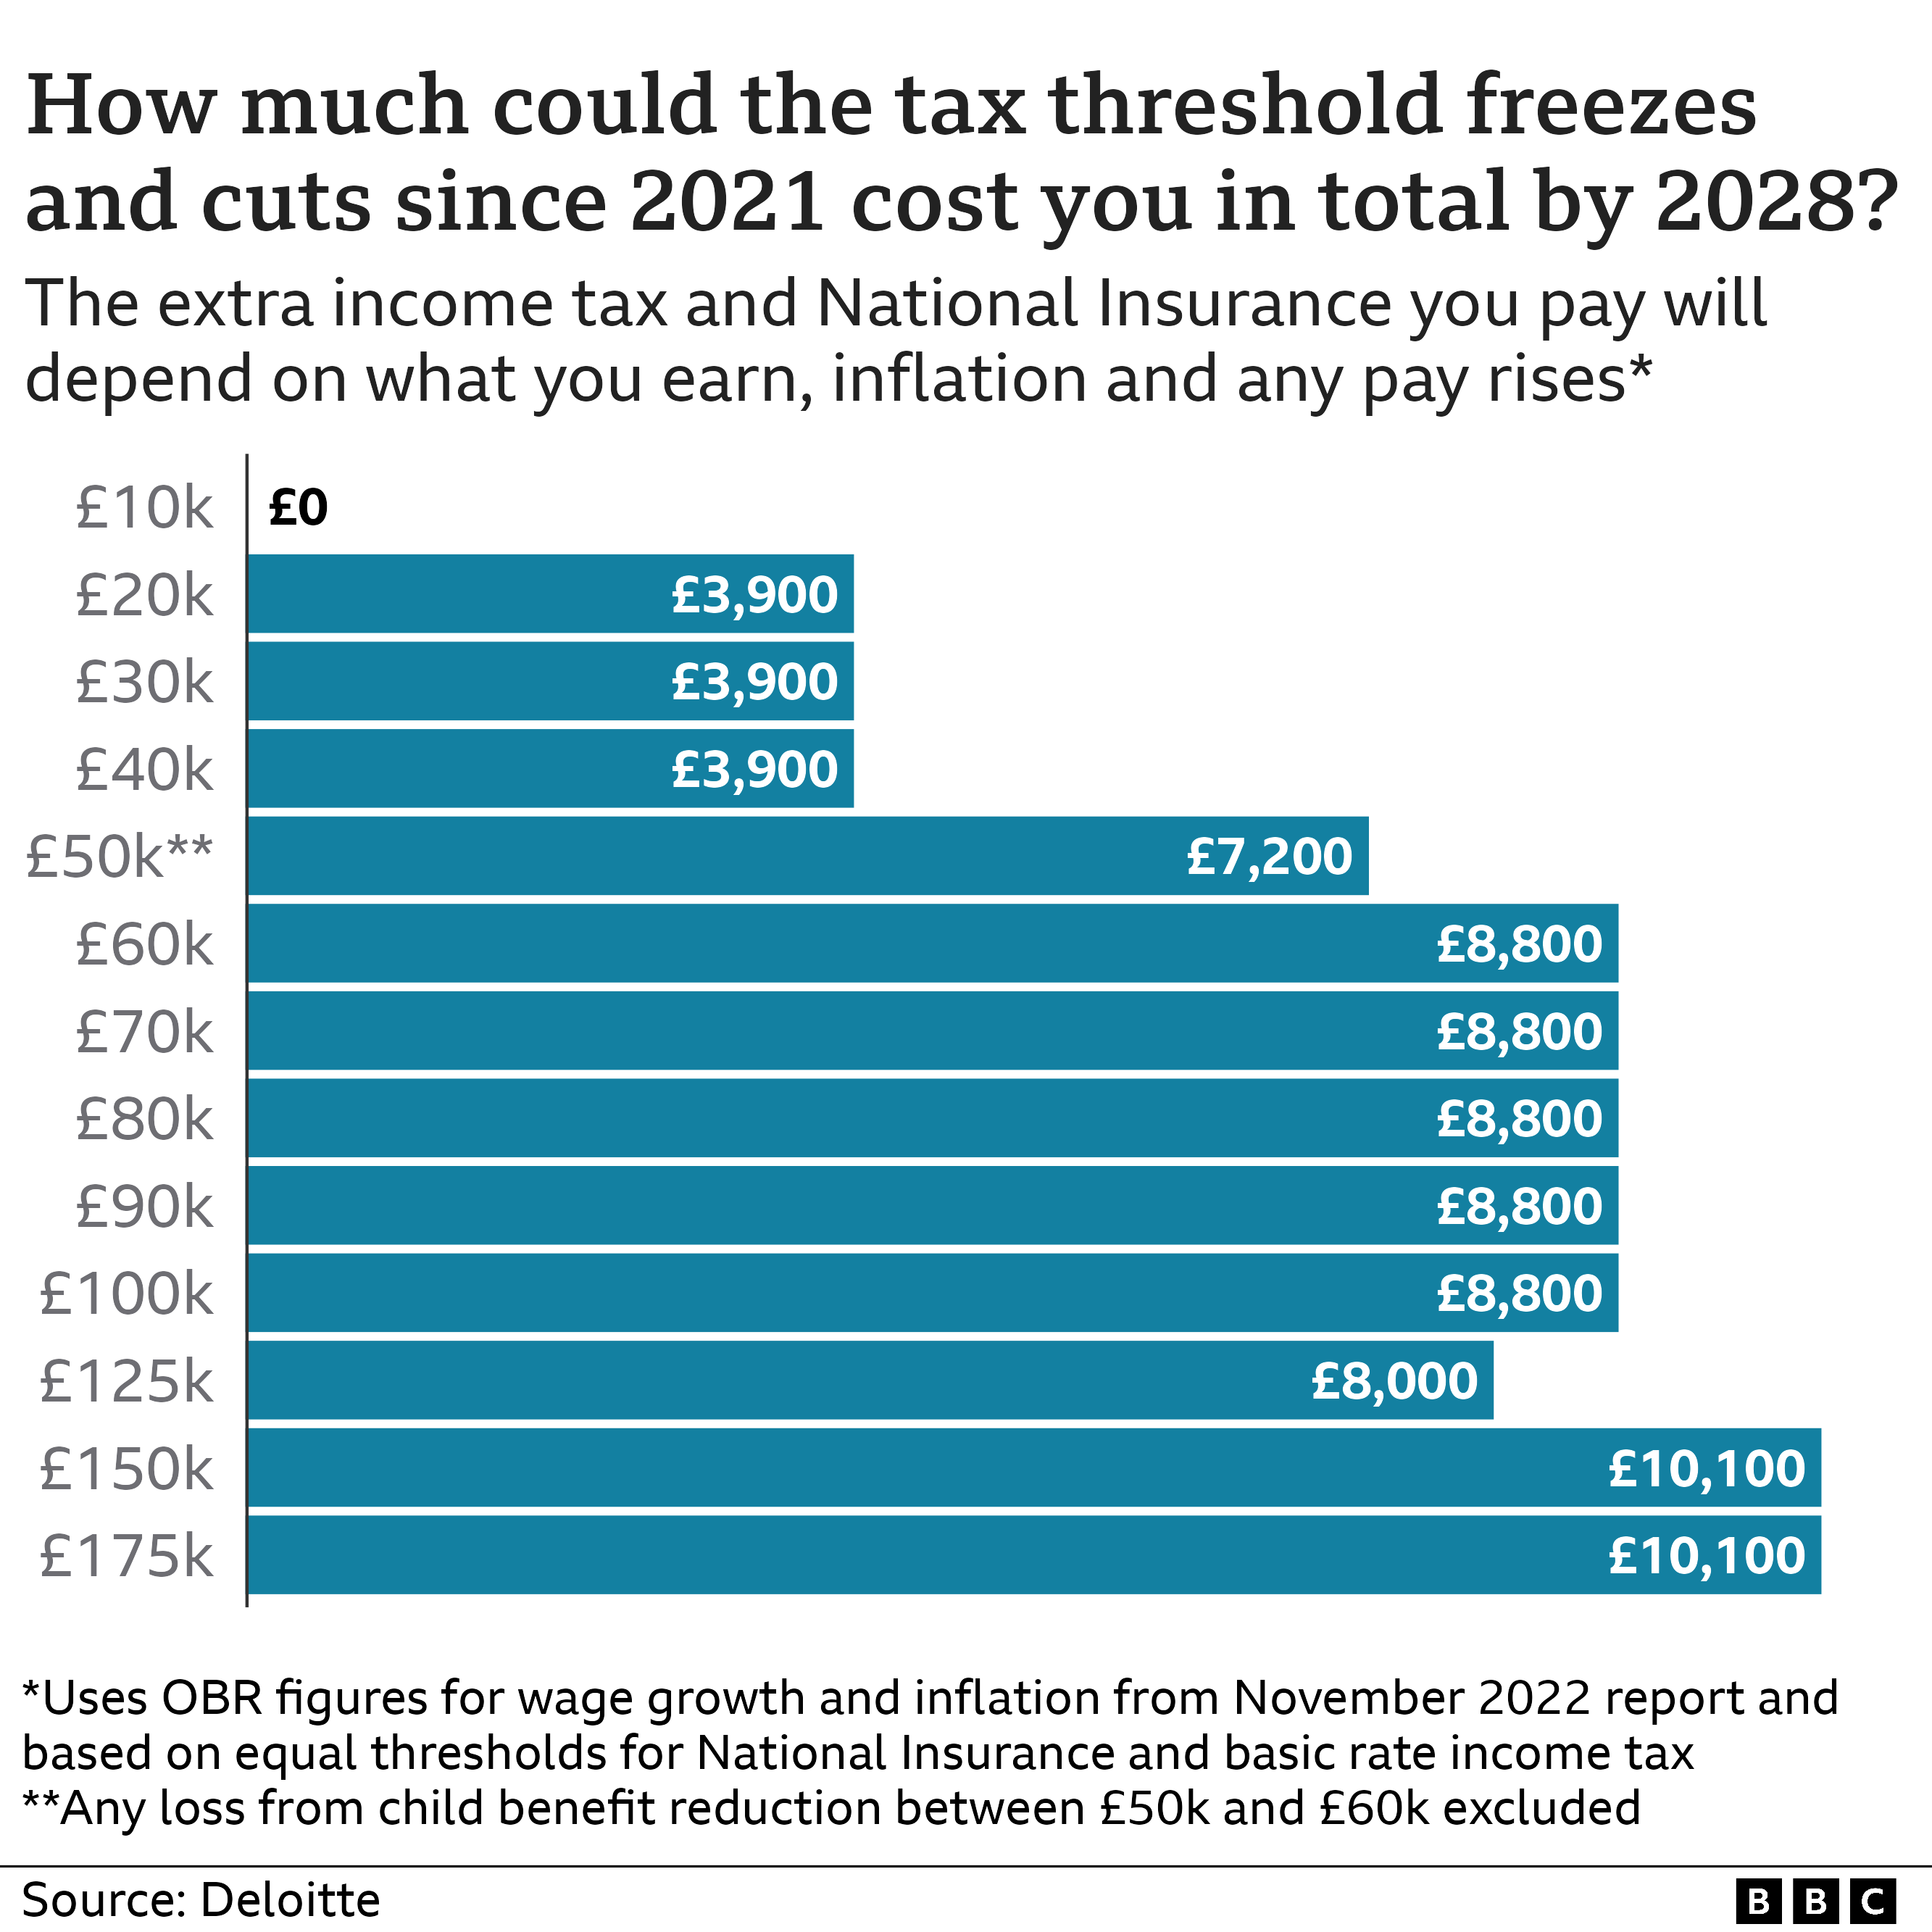 Chart showing total amount income tax and National Insurance freezes could cost people depending on how much they earn by 2028 assuming wages and inflation increase according to OBR predictions: Someone earning £10k would pay nothing extra, £20k-£40k - an extra £3,900 in total, £50k - £7,200 (excluding any loss from child benefit withdrawal), £60k-£100k - £8,800, £125k - £8,000, £150k and £175k - £10,100